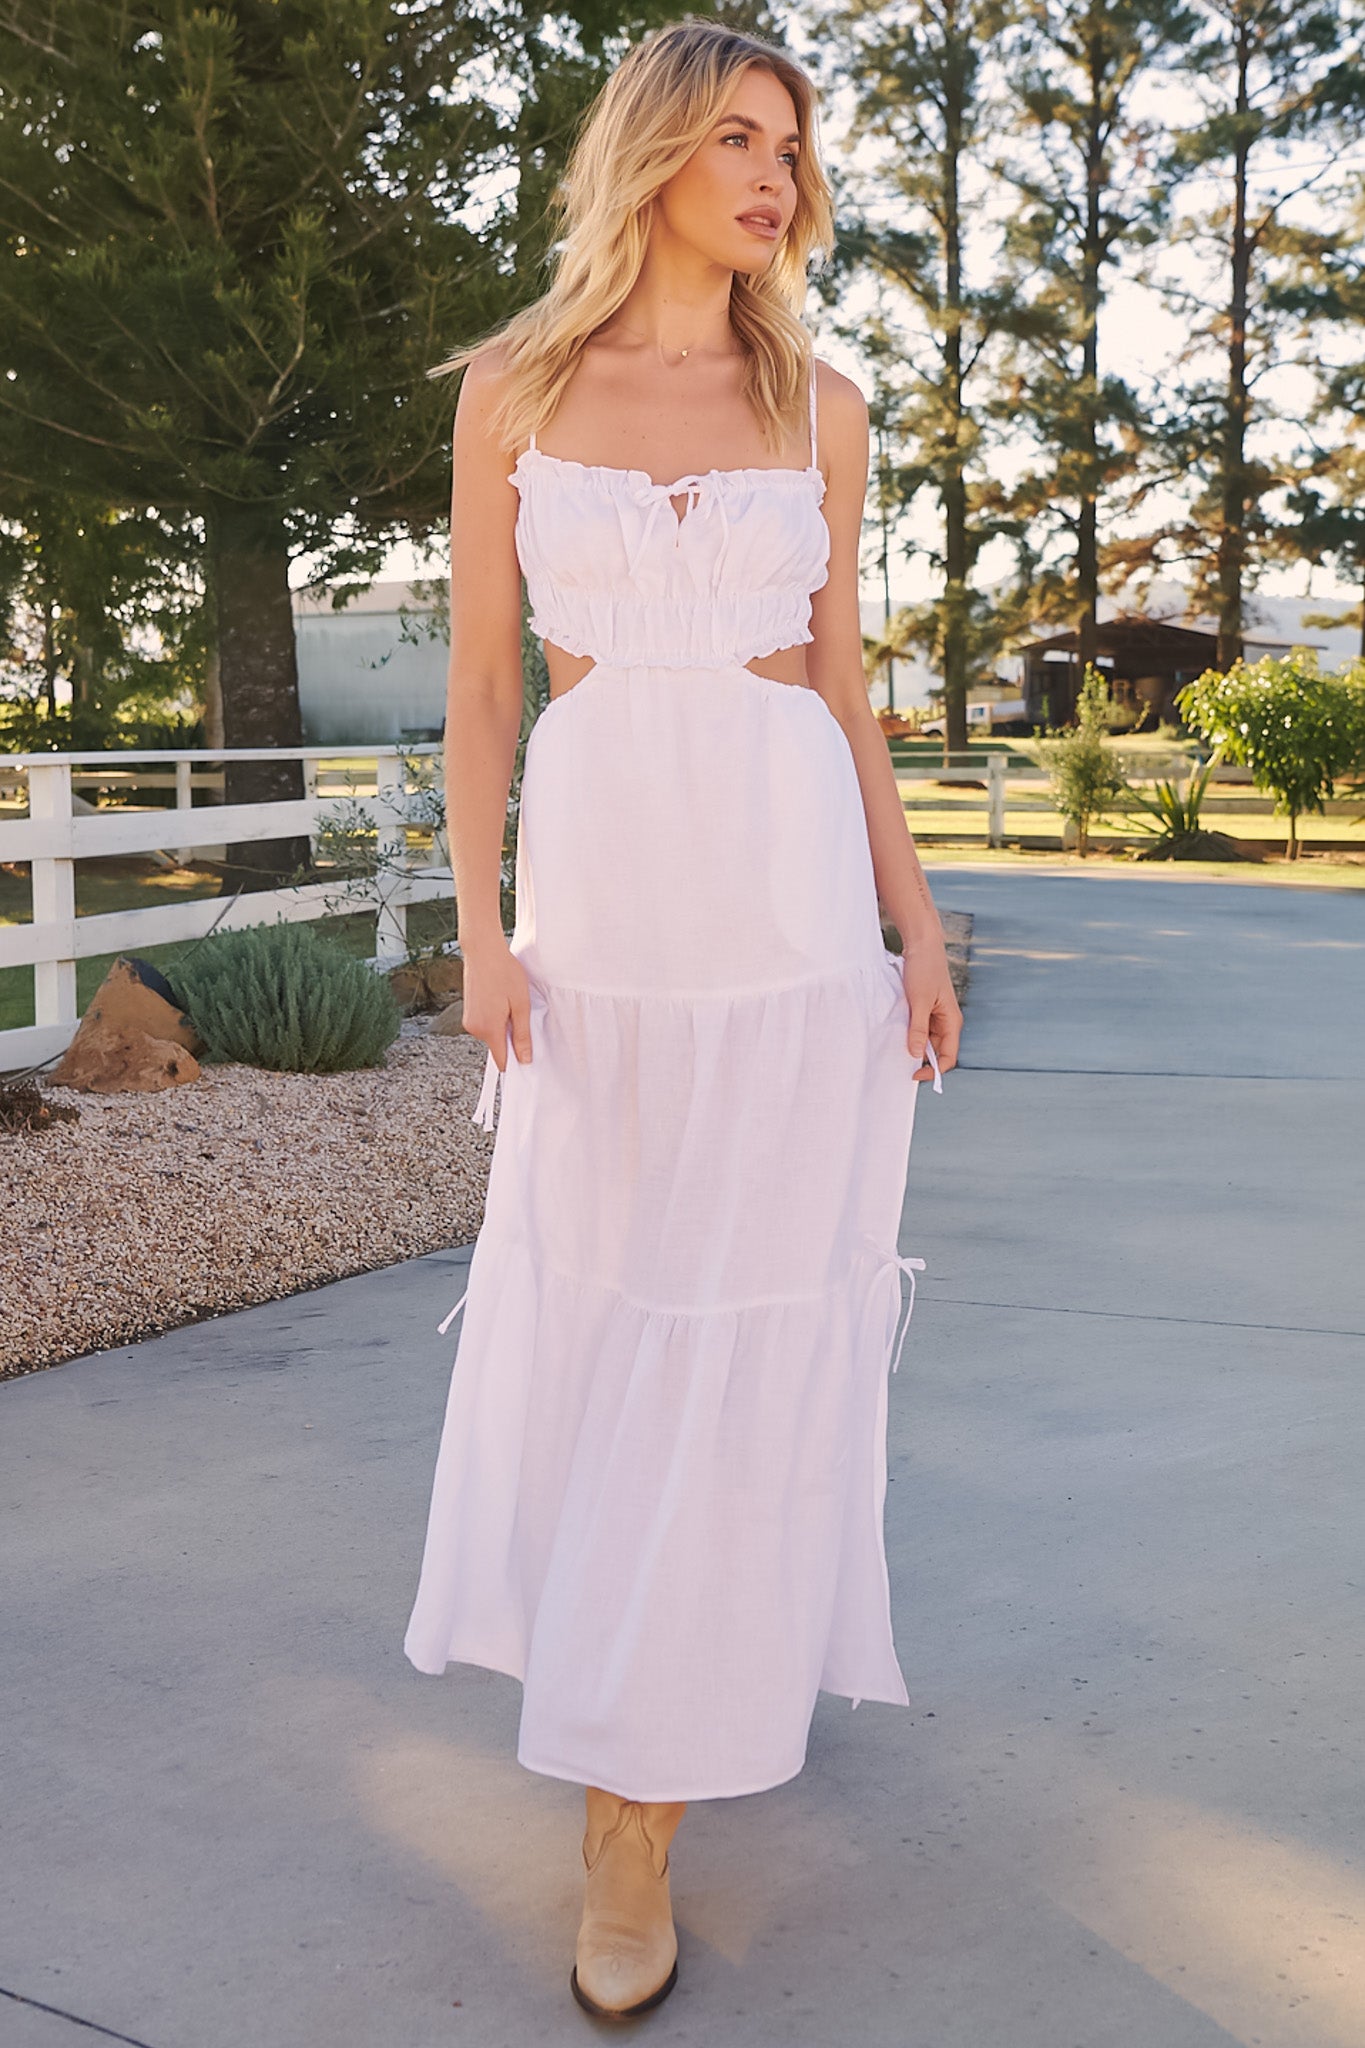 JAASE - Koda Maxi Dress: Cut Out Tiered Dress with Spaghetti Straps in White